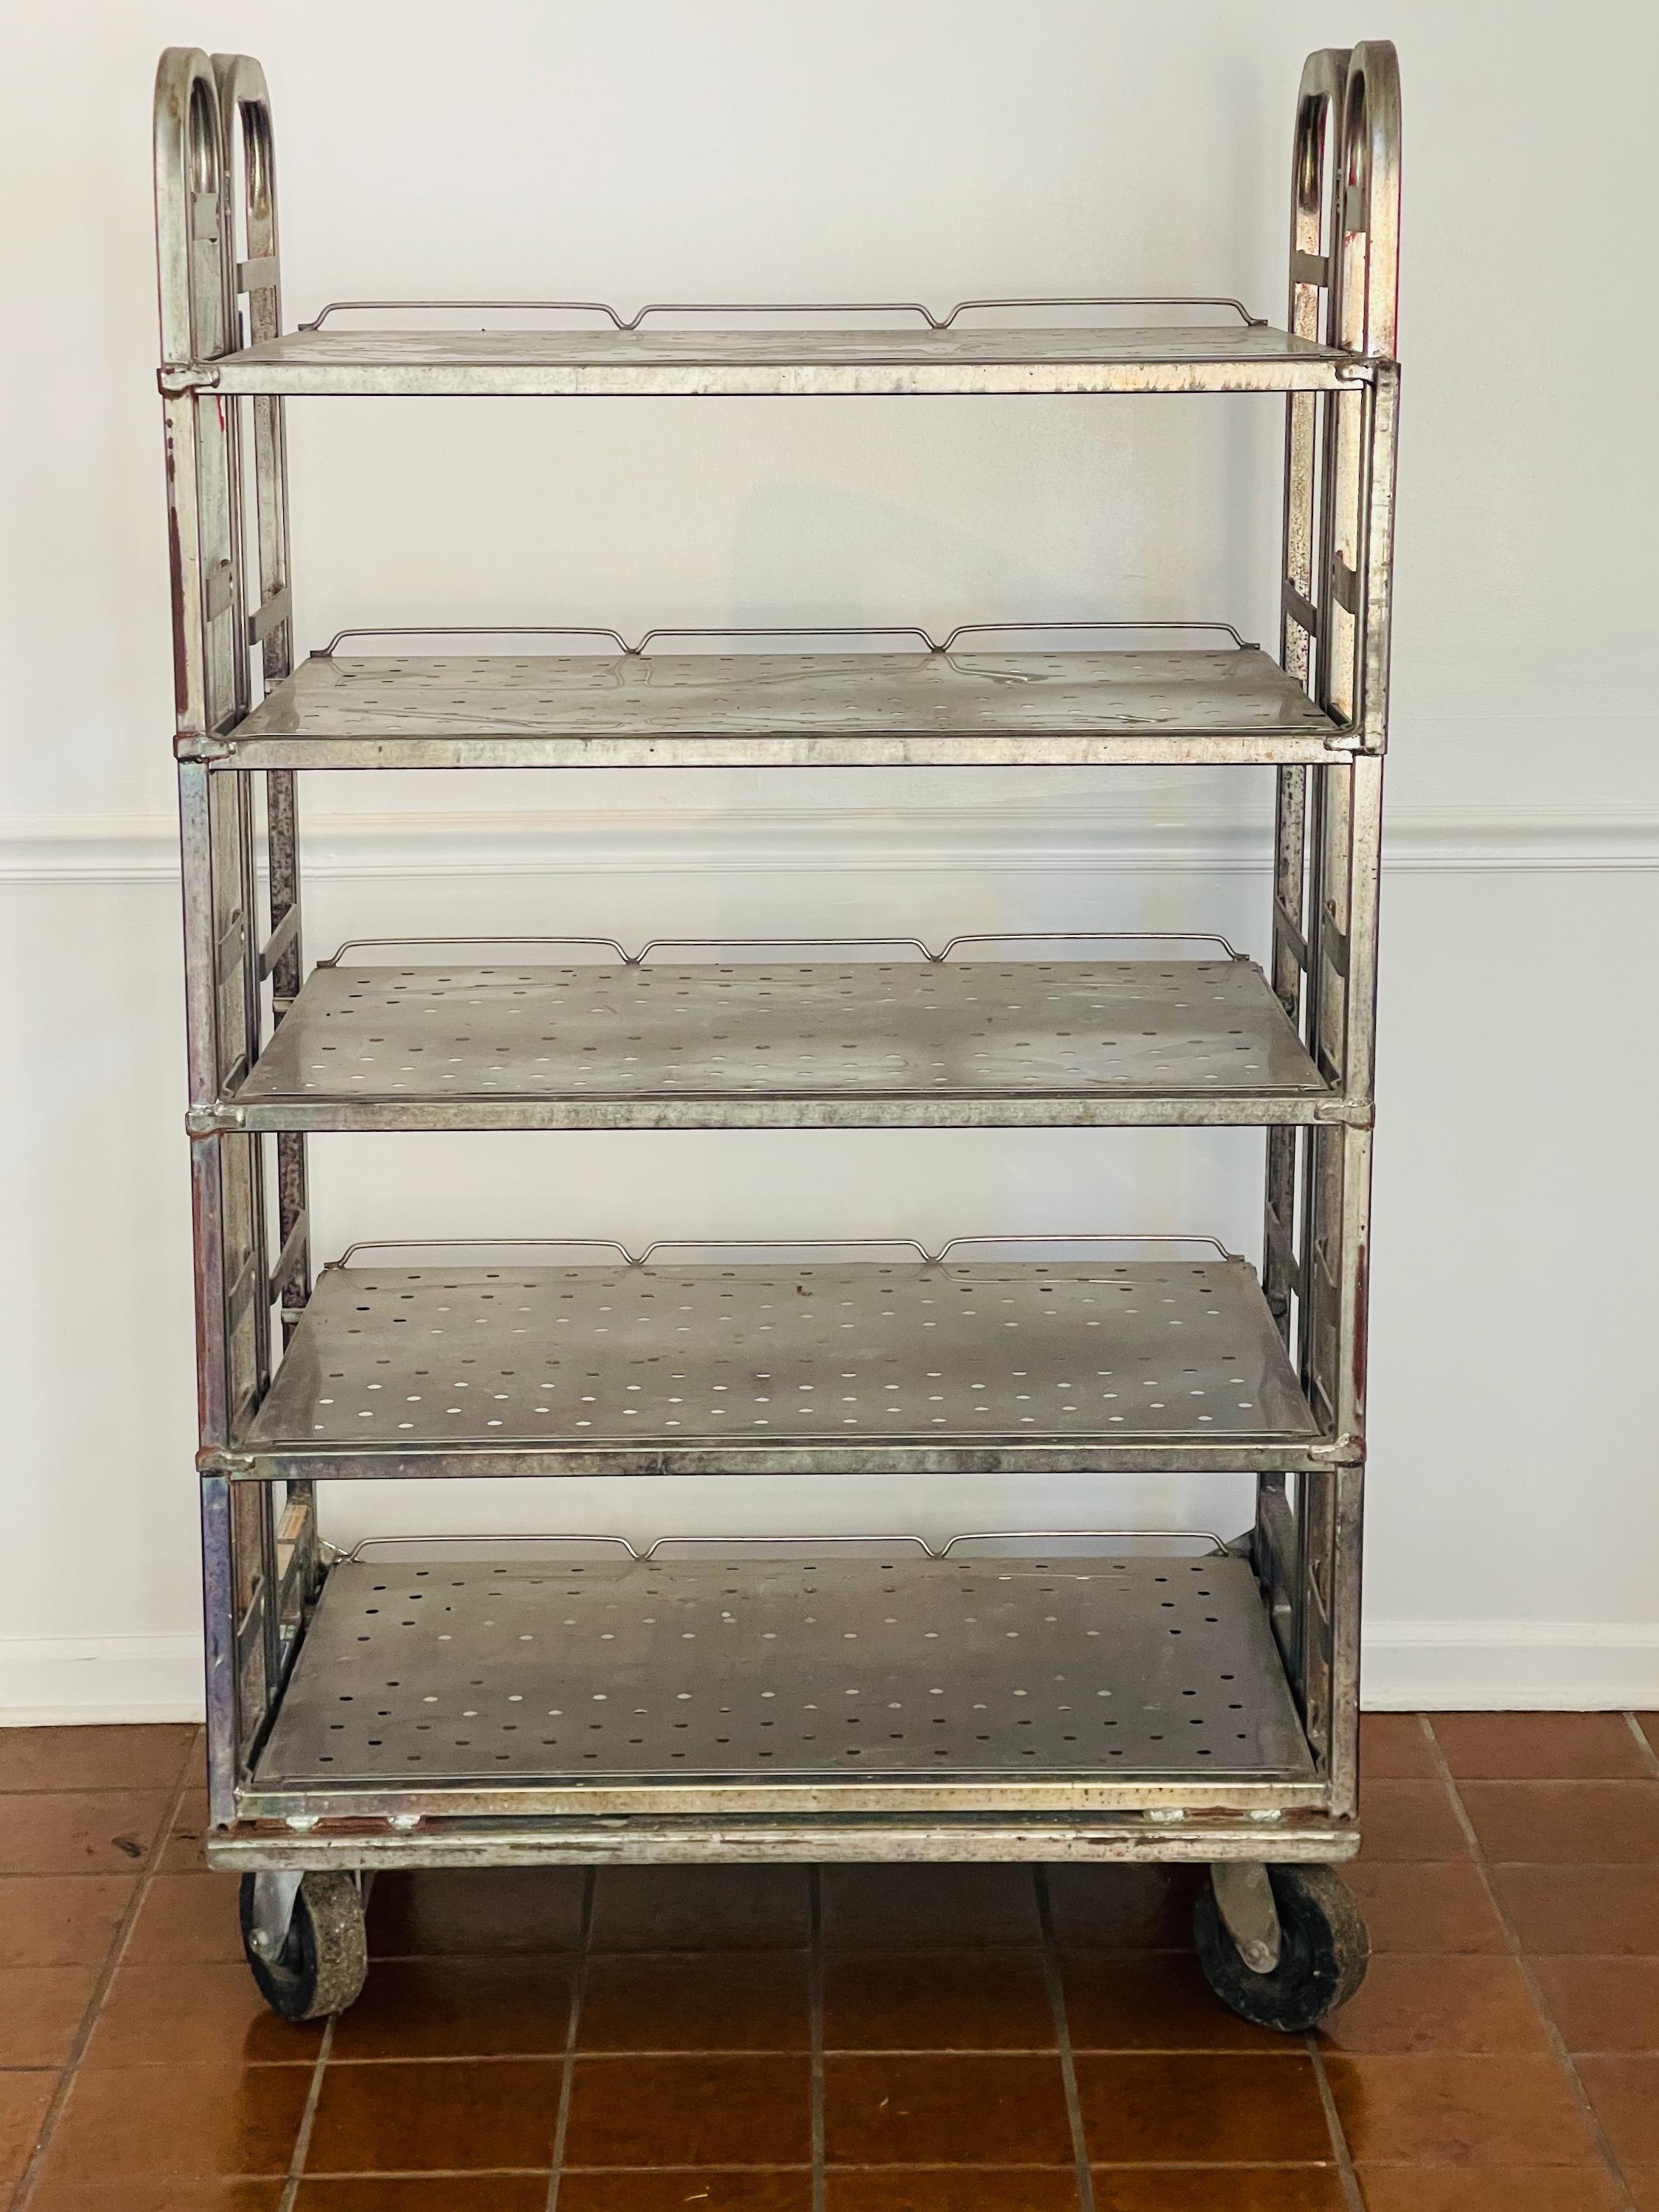 Great shelving for kitchen or living room. Indoors only. Heavy duty. Originally used in for the dairy industry. Wonderful industrial look.